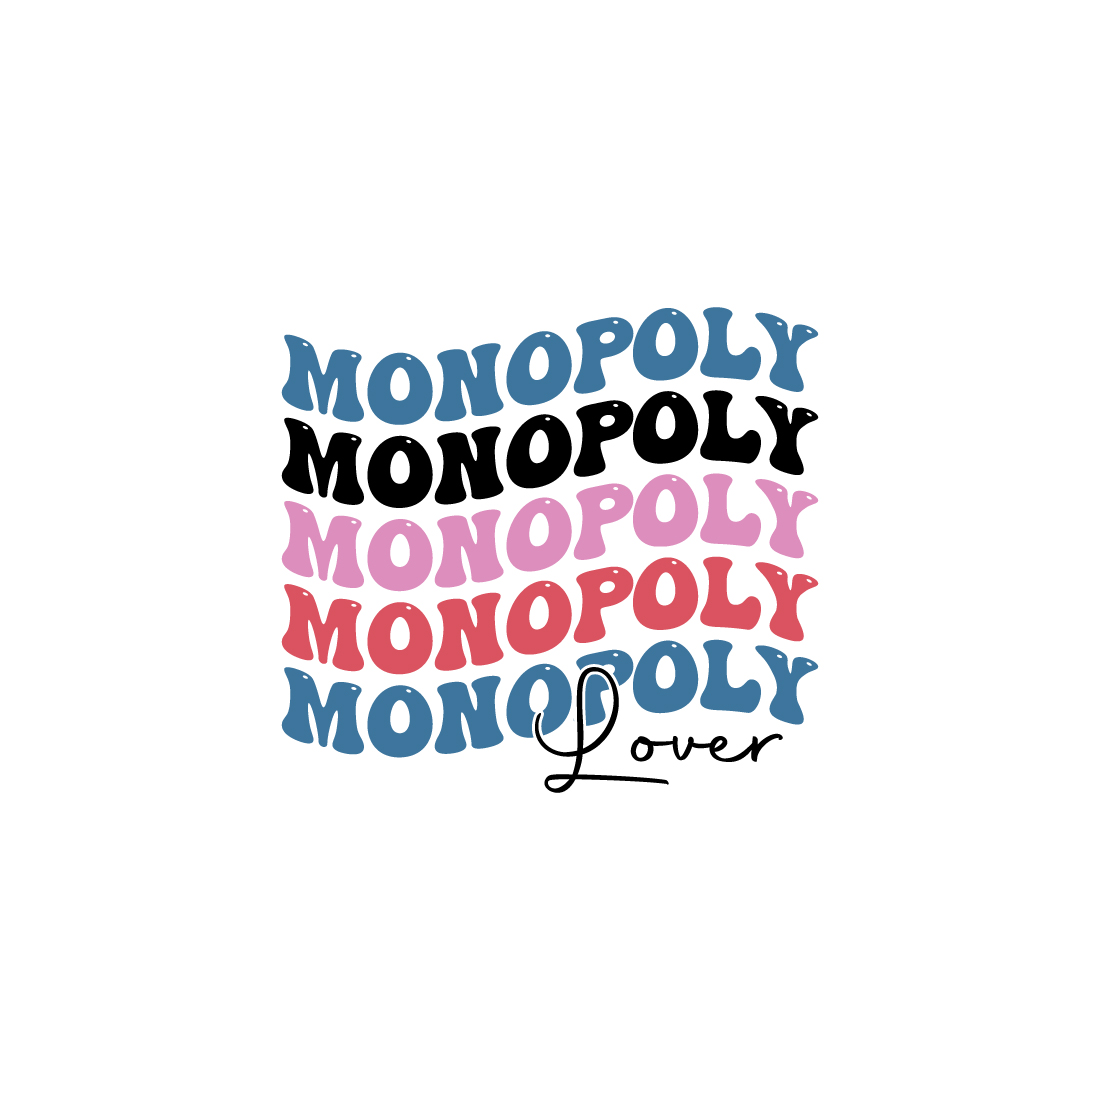 Gallery: Voters will choose Monopoly's next 8 tokens